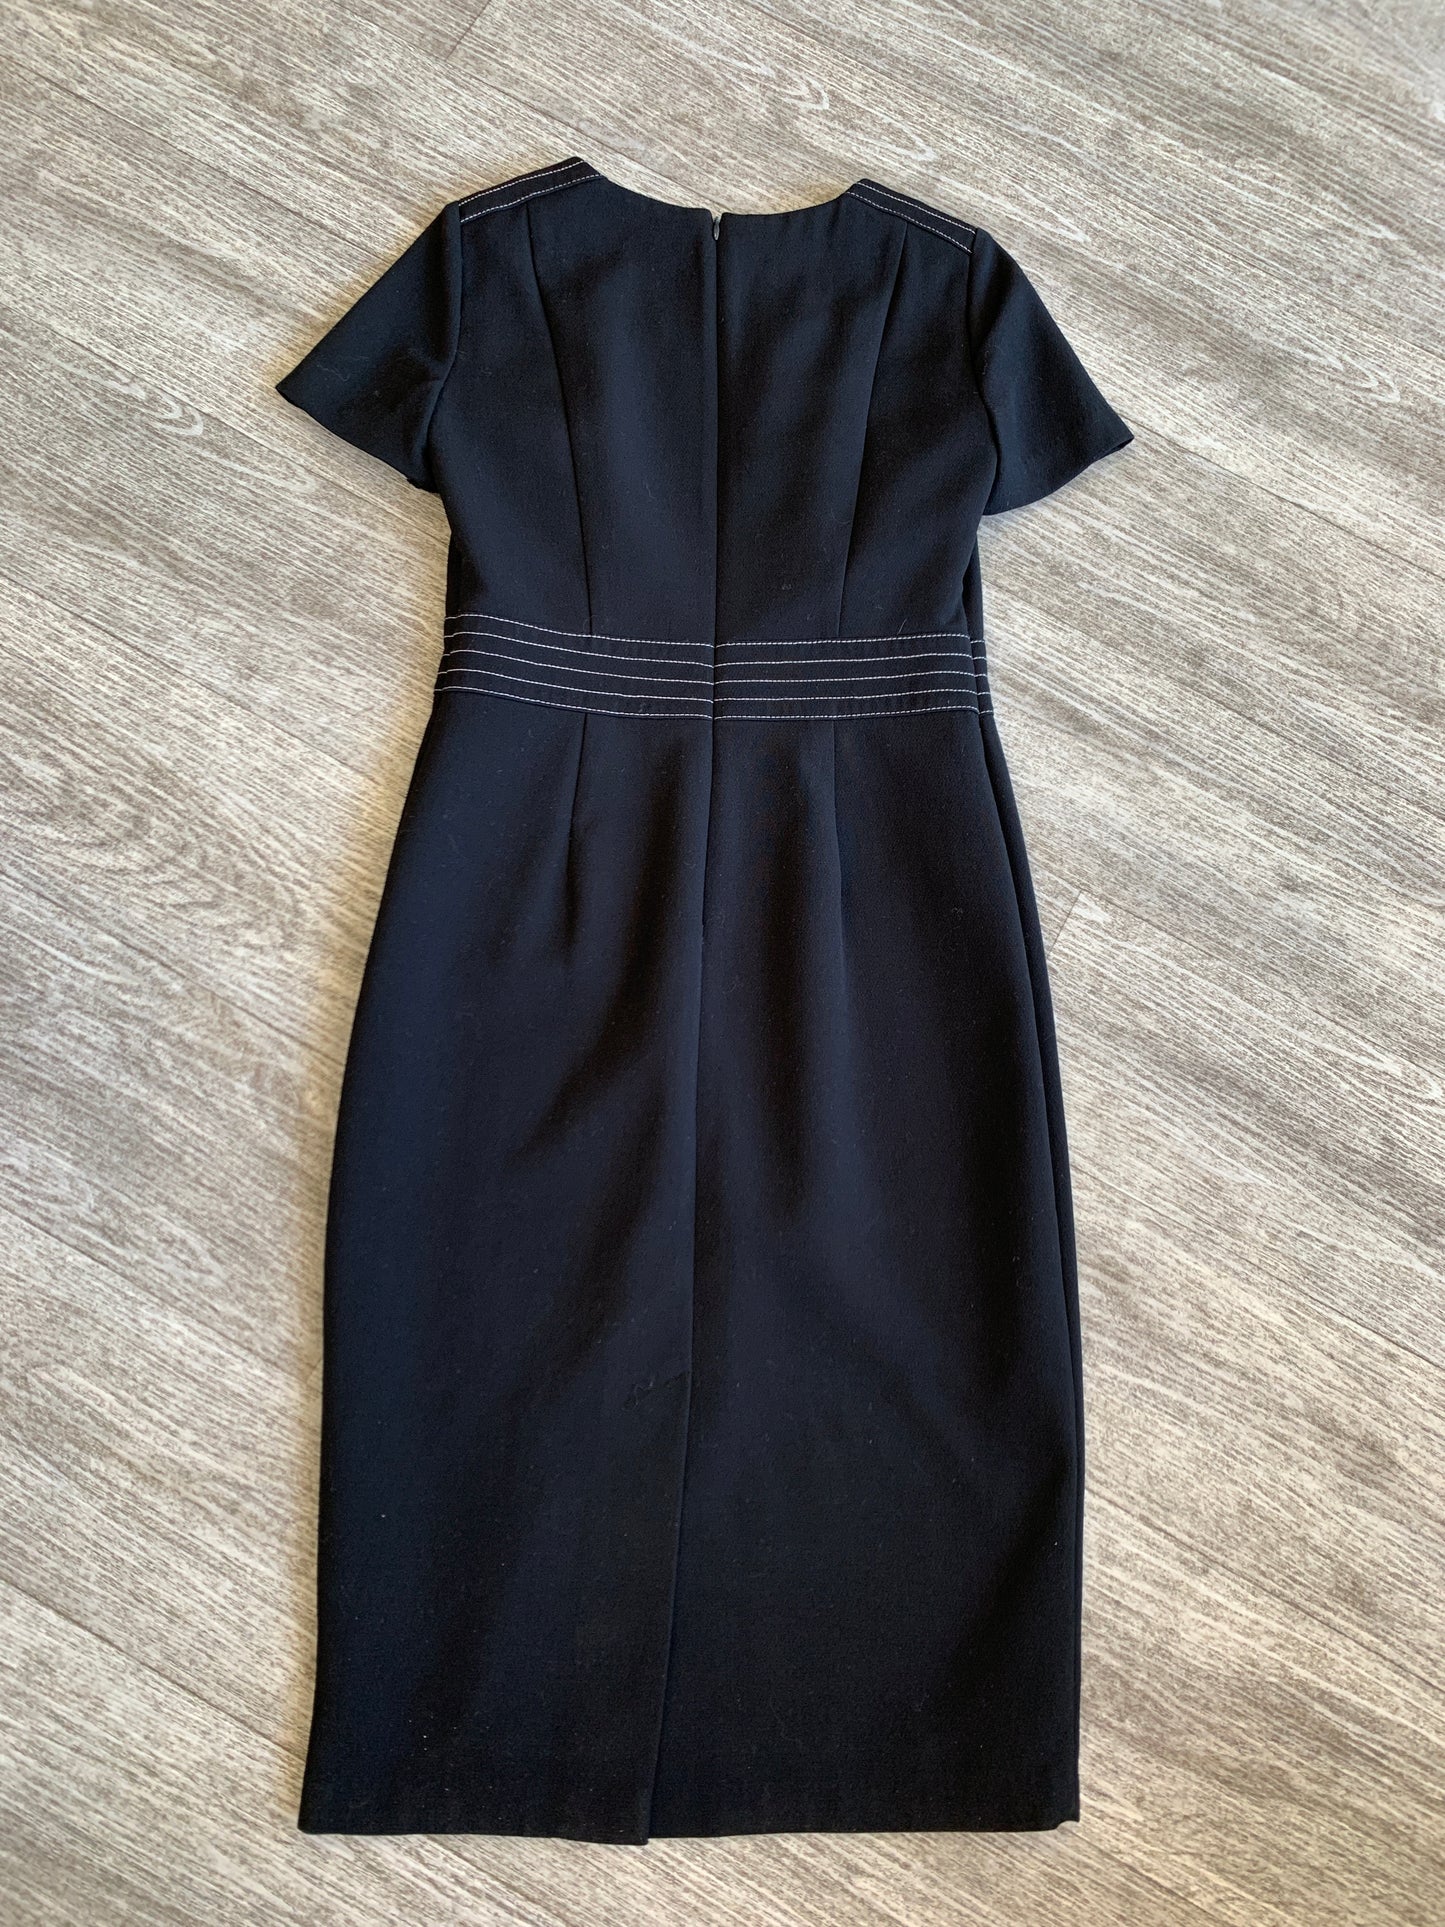 M & S Collections Black Midi Dress With White Stitch Detail UK10